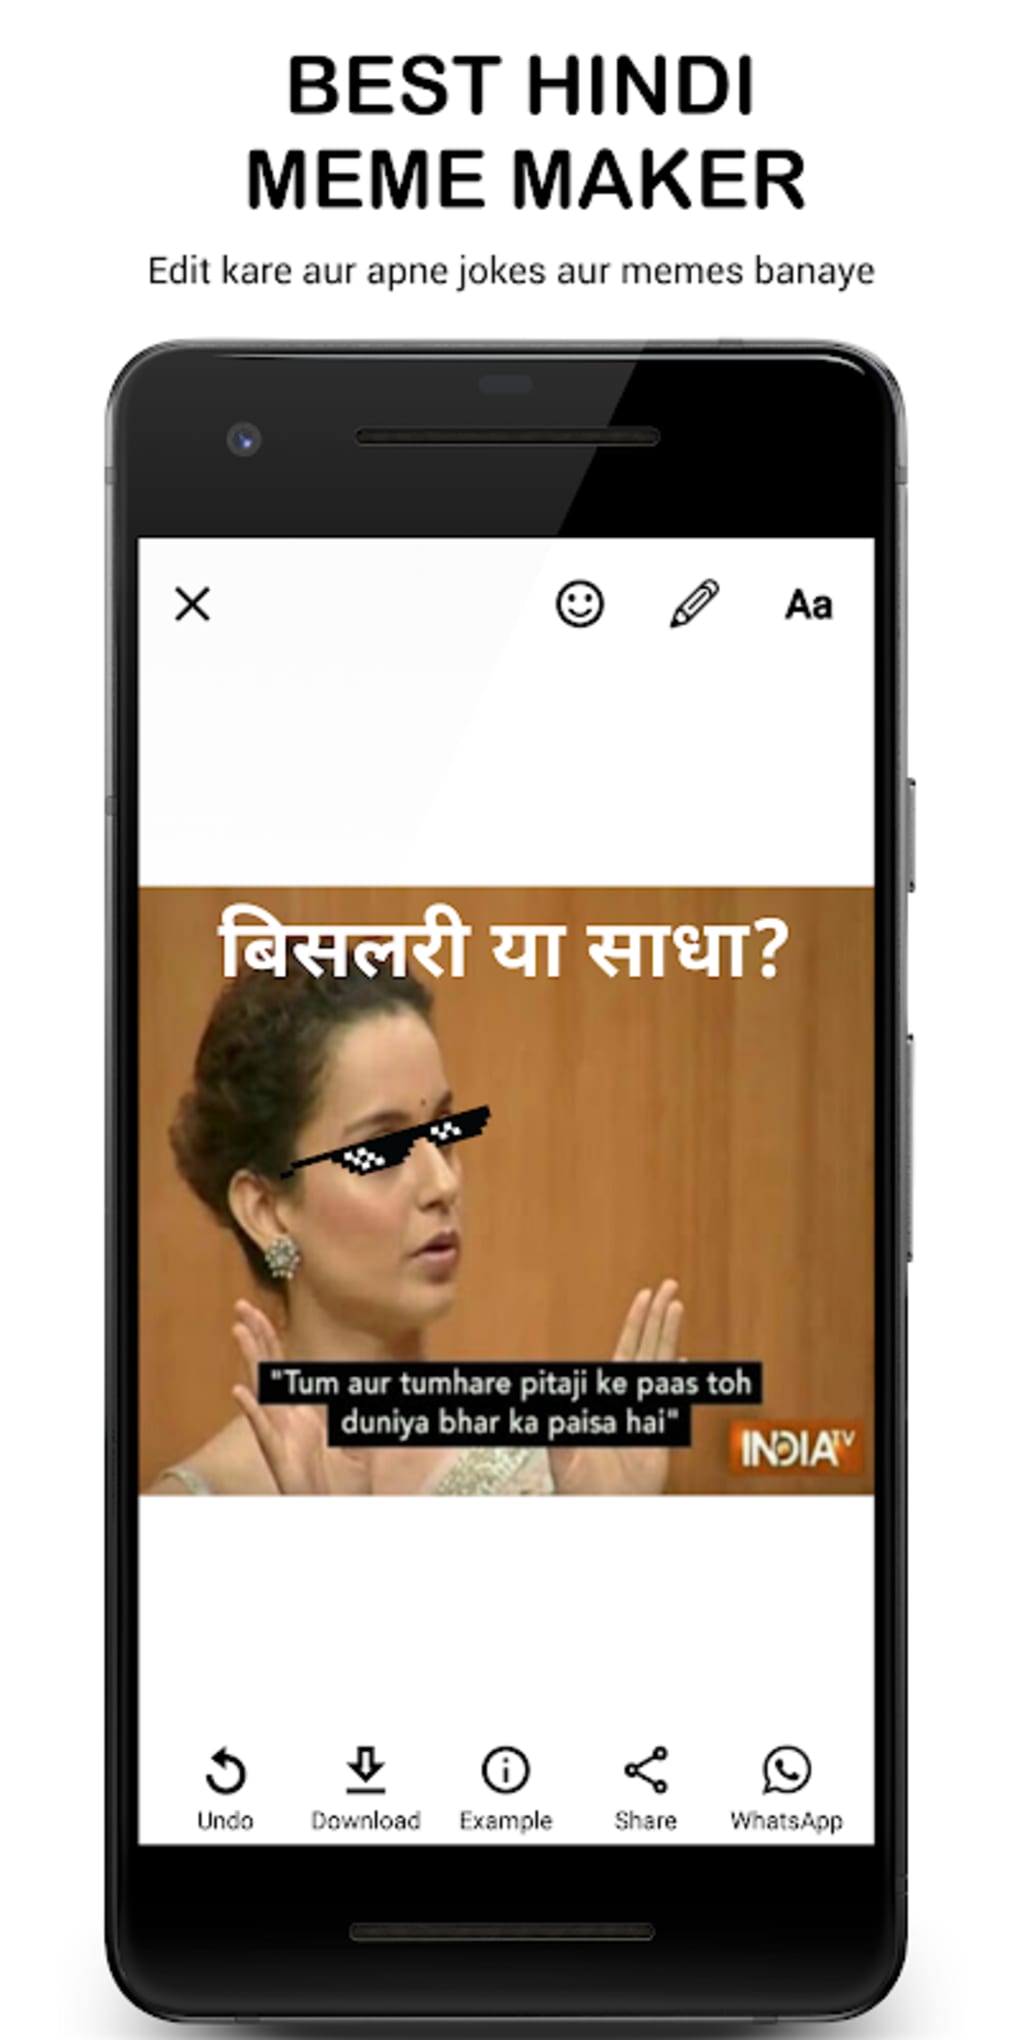 Meme Generator APK Download for Android Free